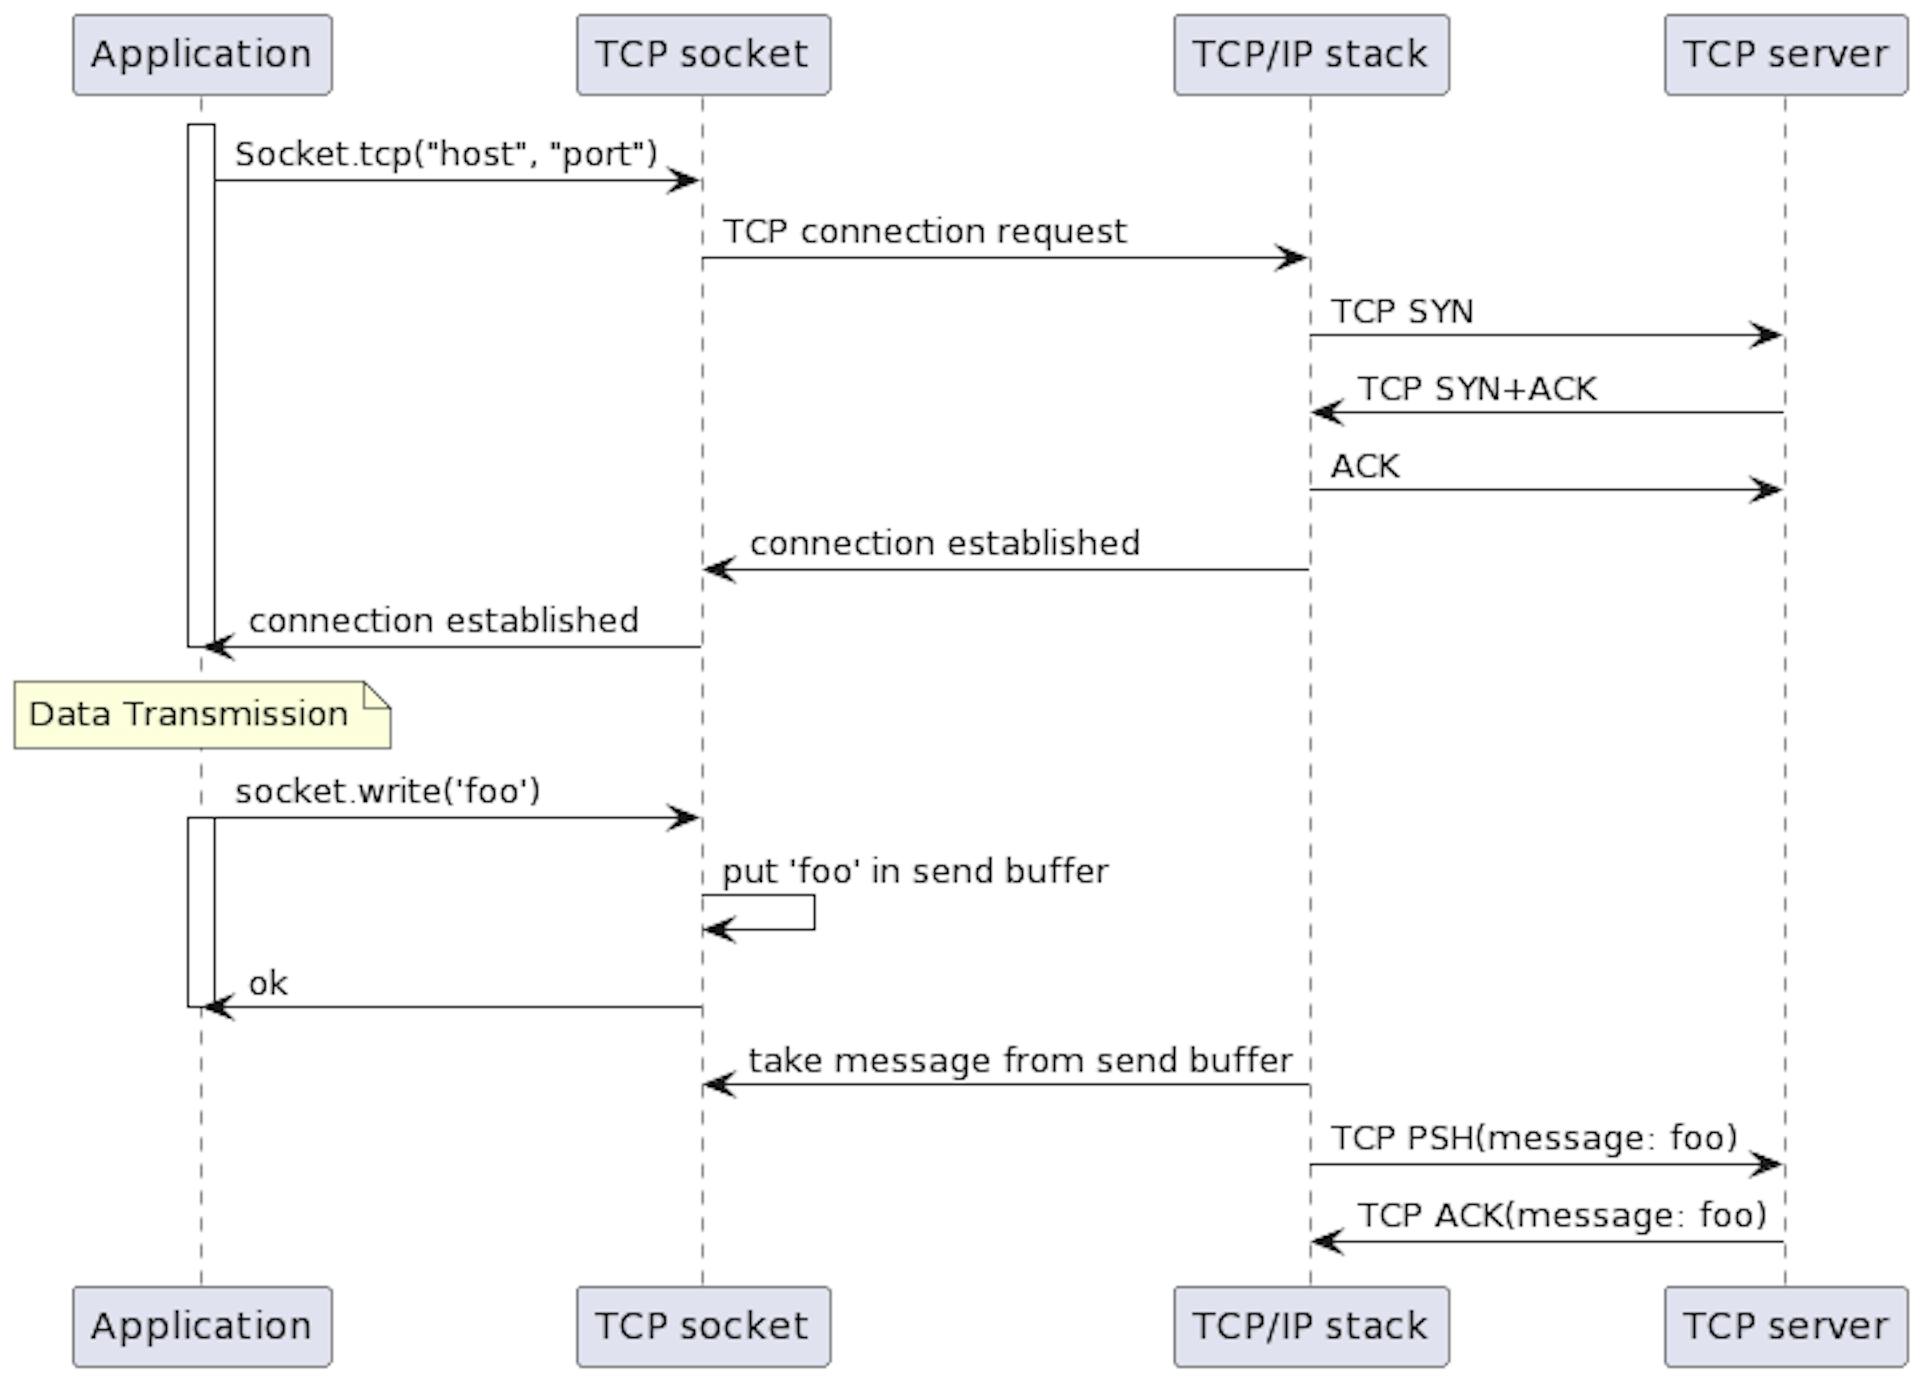 Communication with the TCP socket